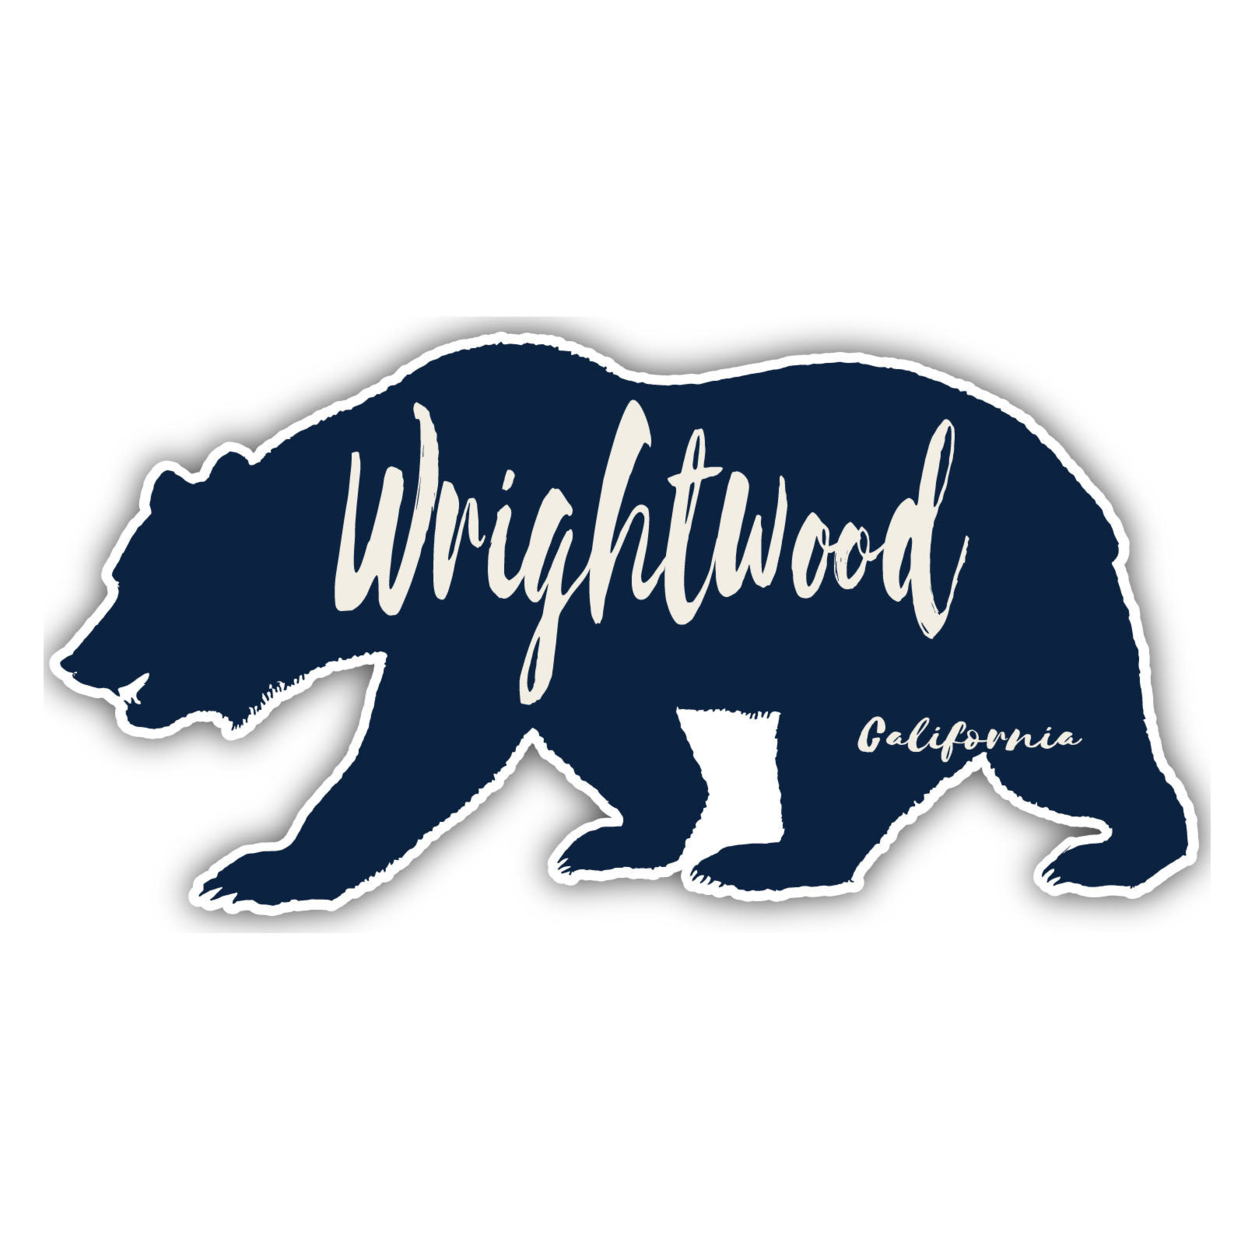 Wrightwood California Souvenir Decorative Stickers (Choose Theme And Size) - Single Unit, 2-Inch, Great Outdoors